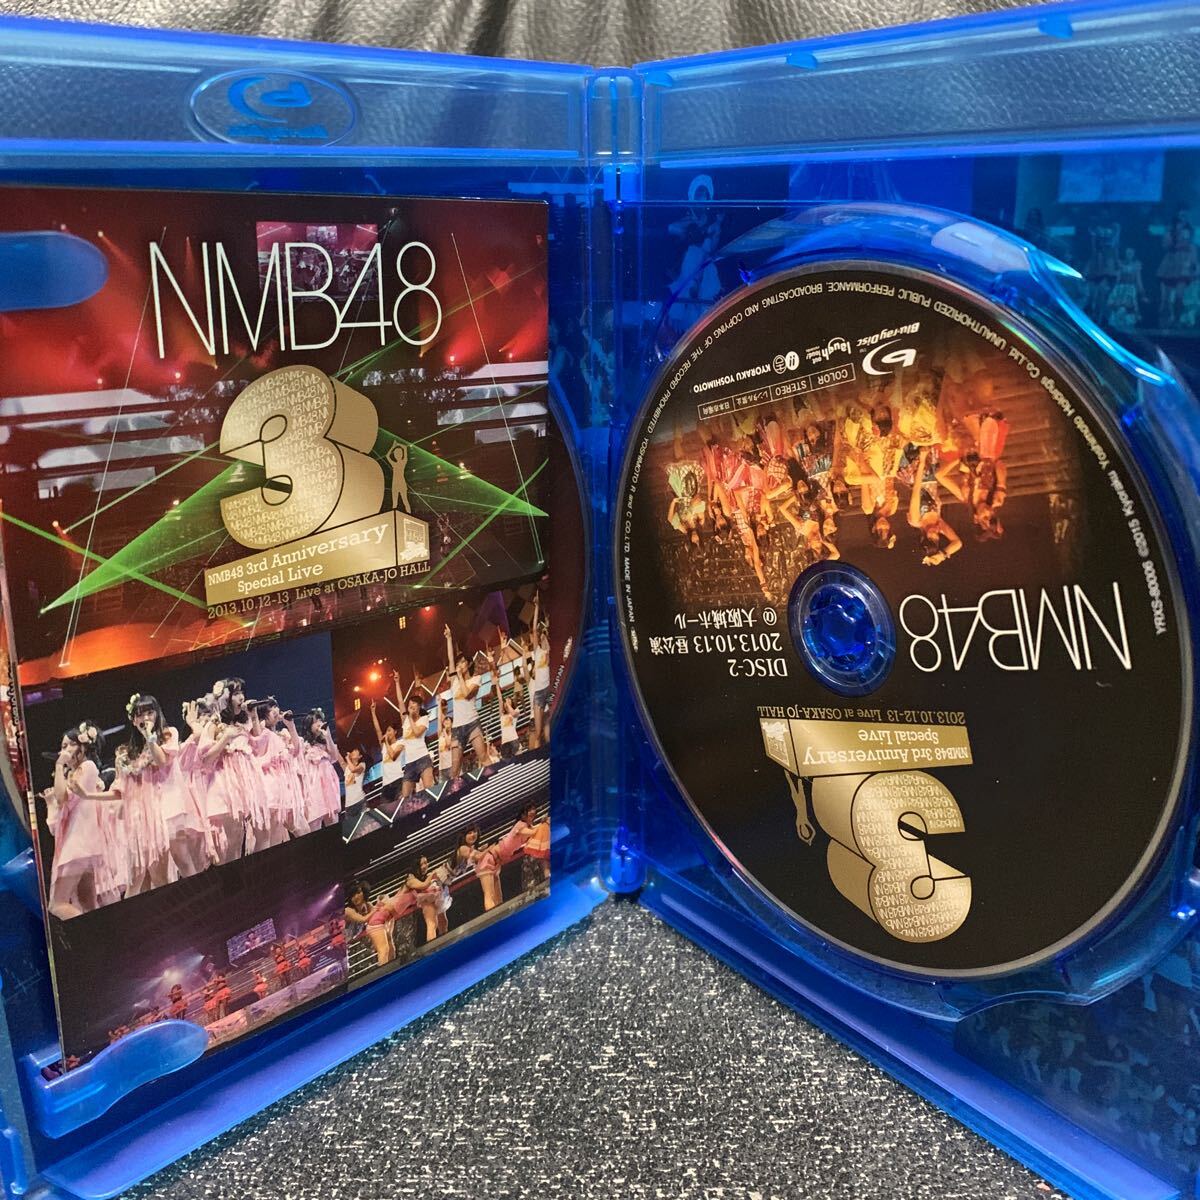 NMB48 3rd Anniversary Special Live(Blu-ray Disc)ブルーレイの画像6